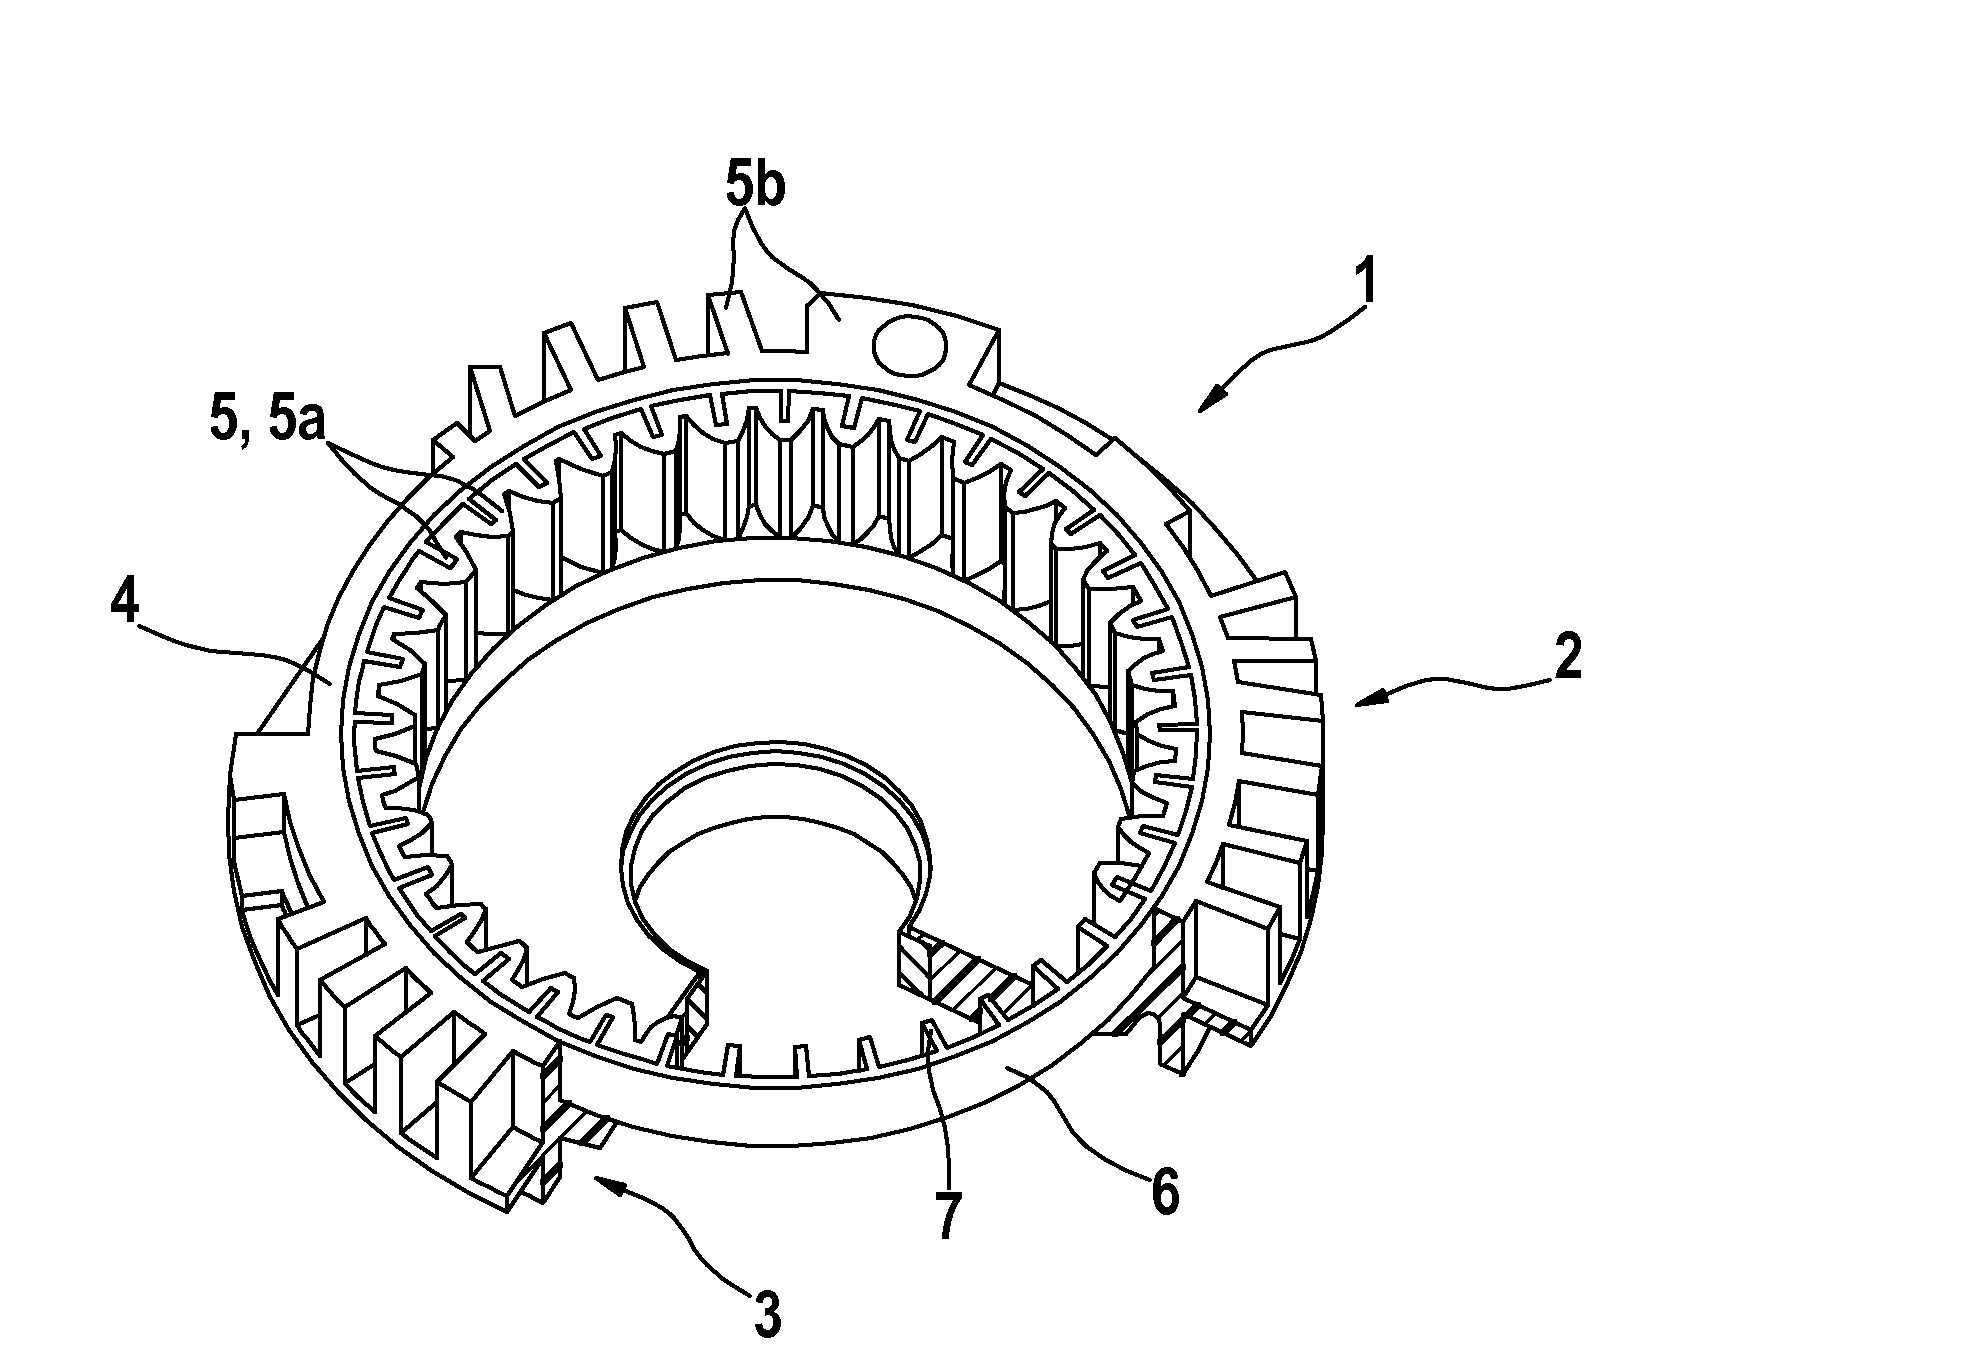 Intermediate bearing device with toothing reinforcement for starter